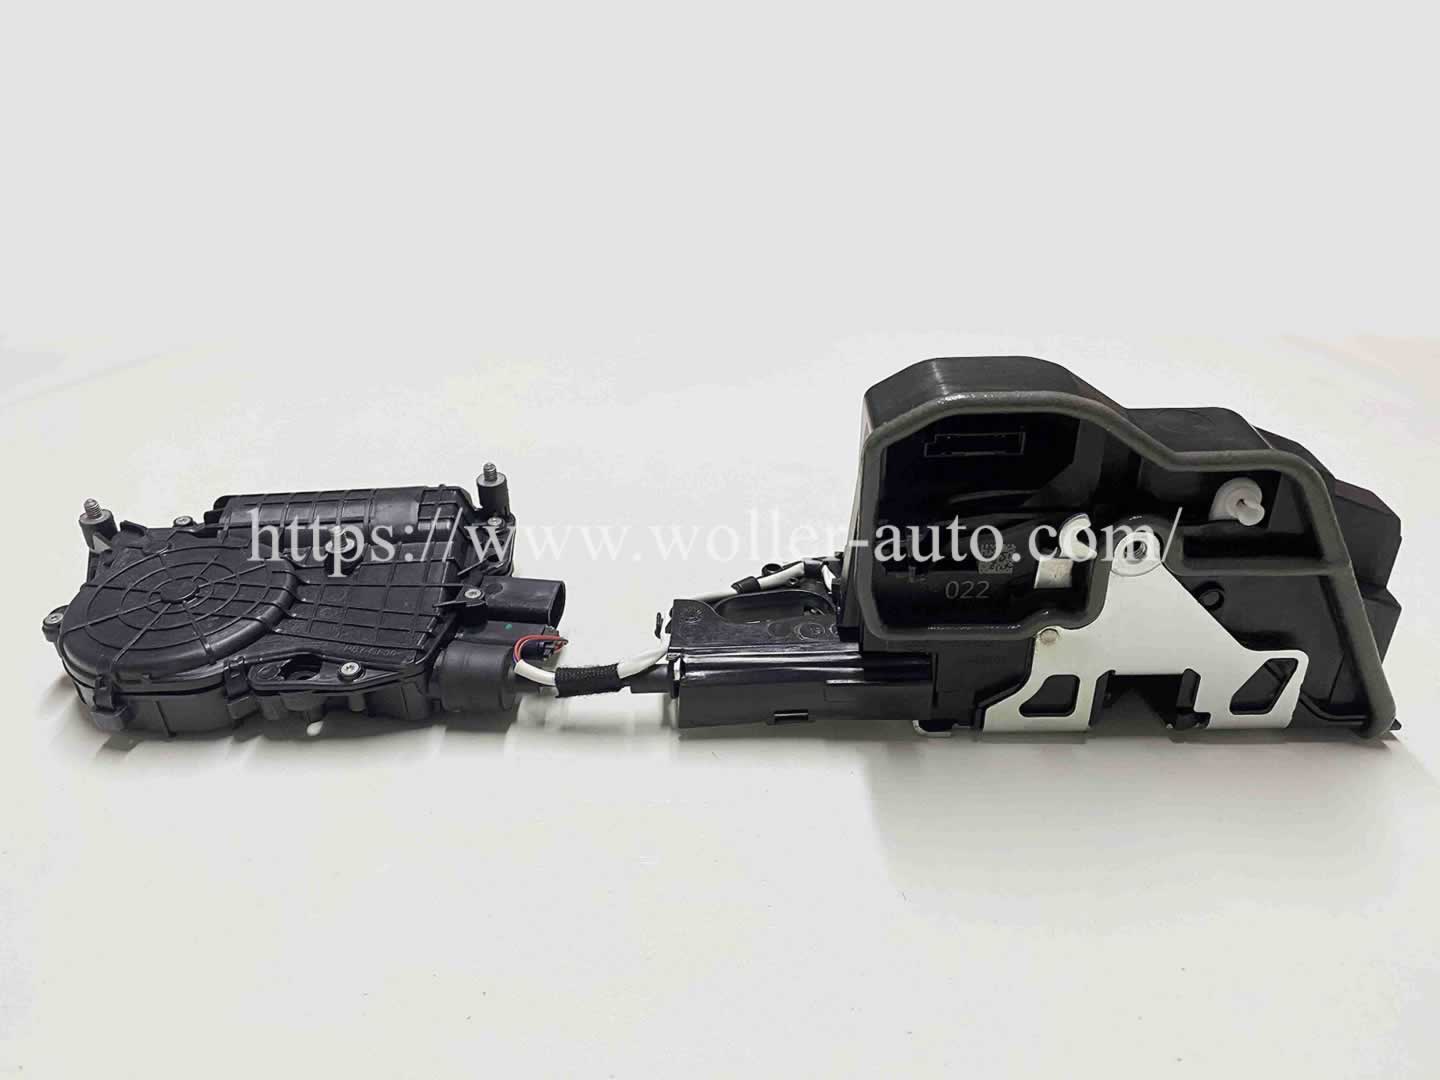 Rear Right Side Soft Close Auto Door Lock Actuator OE 51227185688 / 51 22 7 185 688 / 7185688 For BMW F01 F02 F04 F10 F11 S323A 5 Series 7 Series